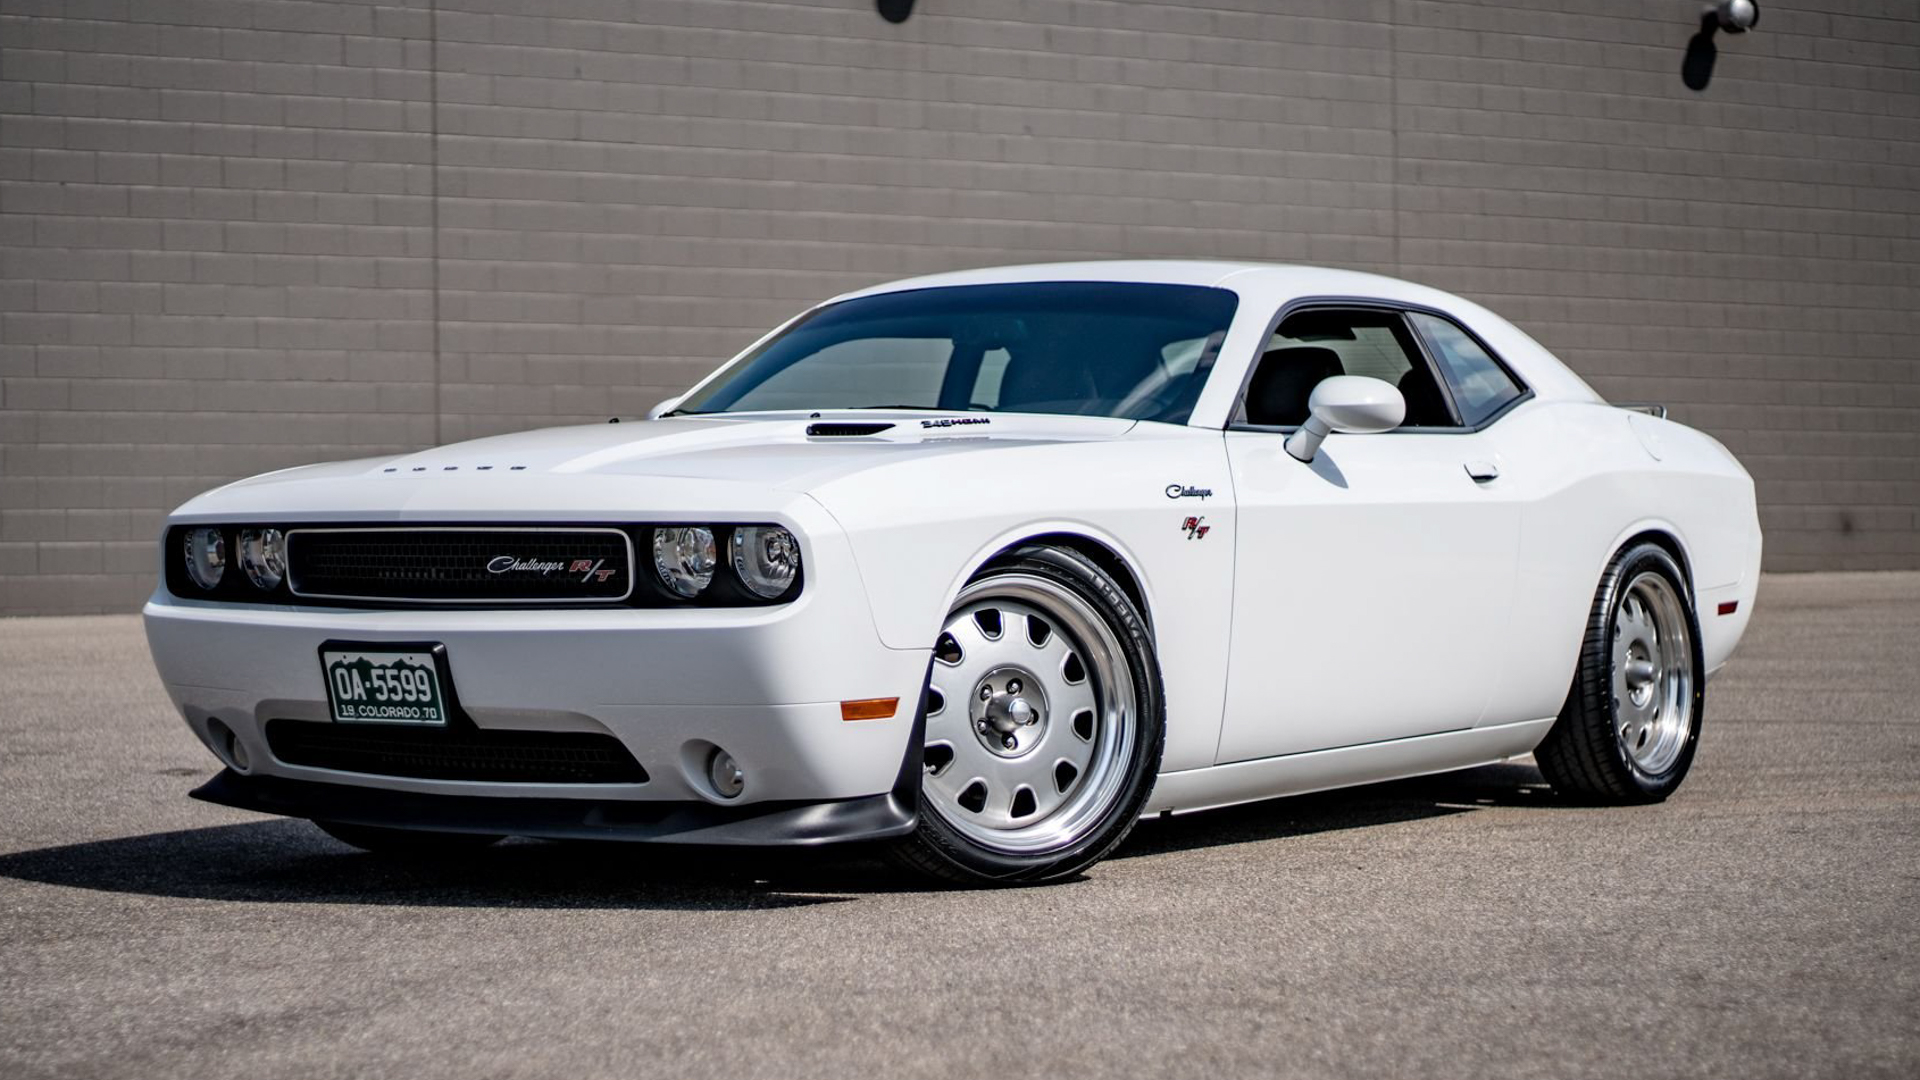 There’s a Modern ‘Vanishing Point’ Dodge Challenger Build For Sale